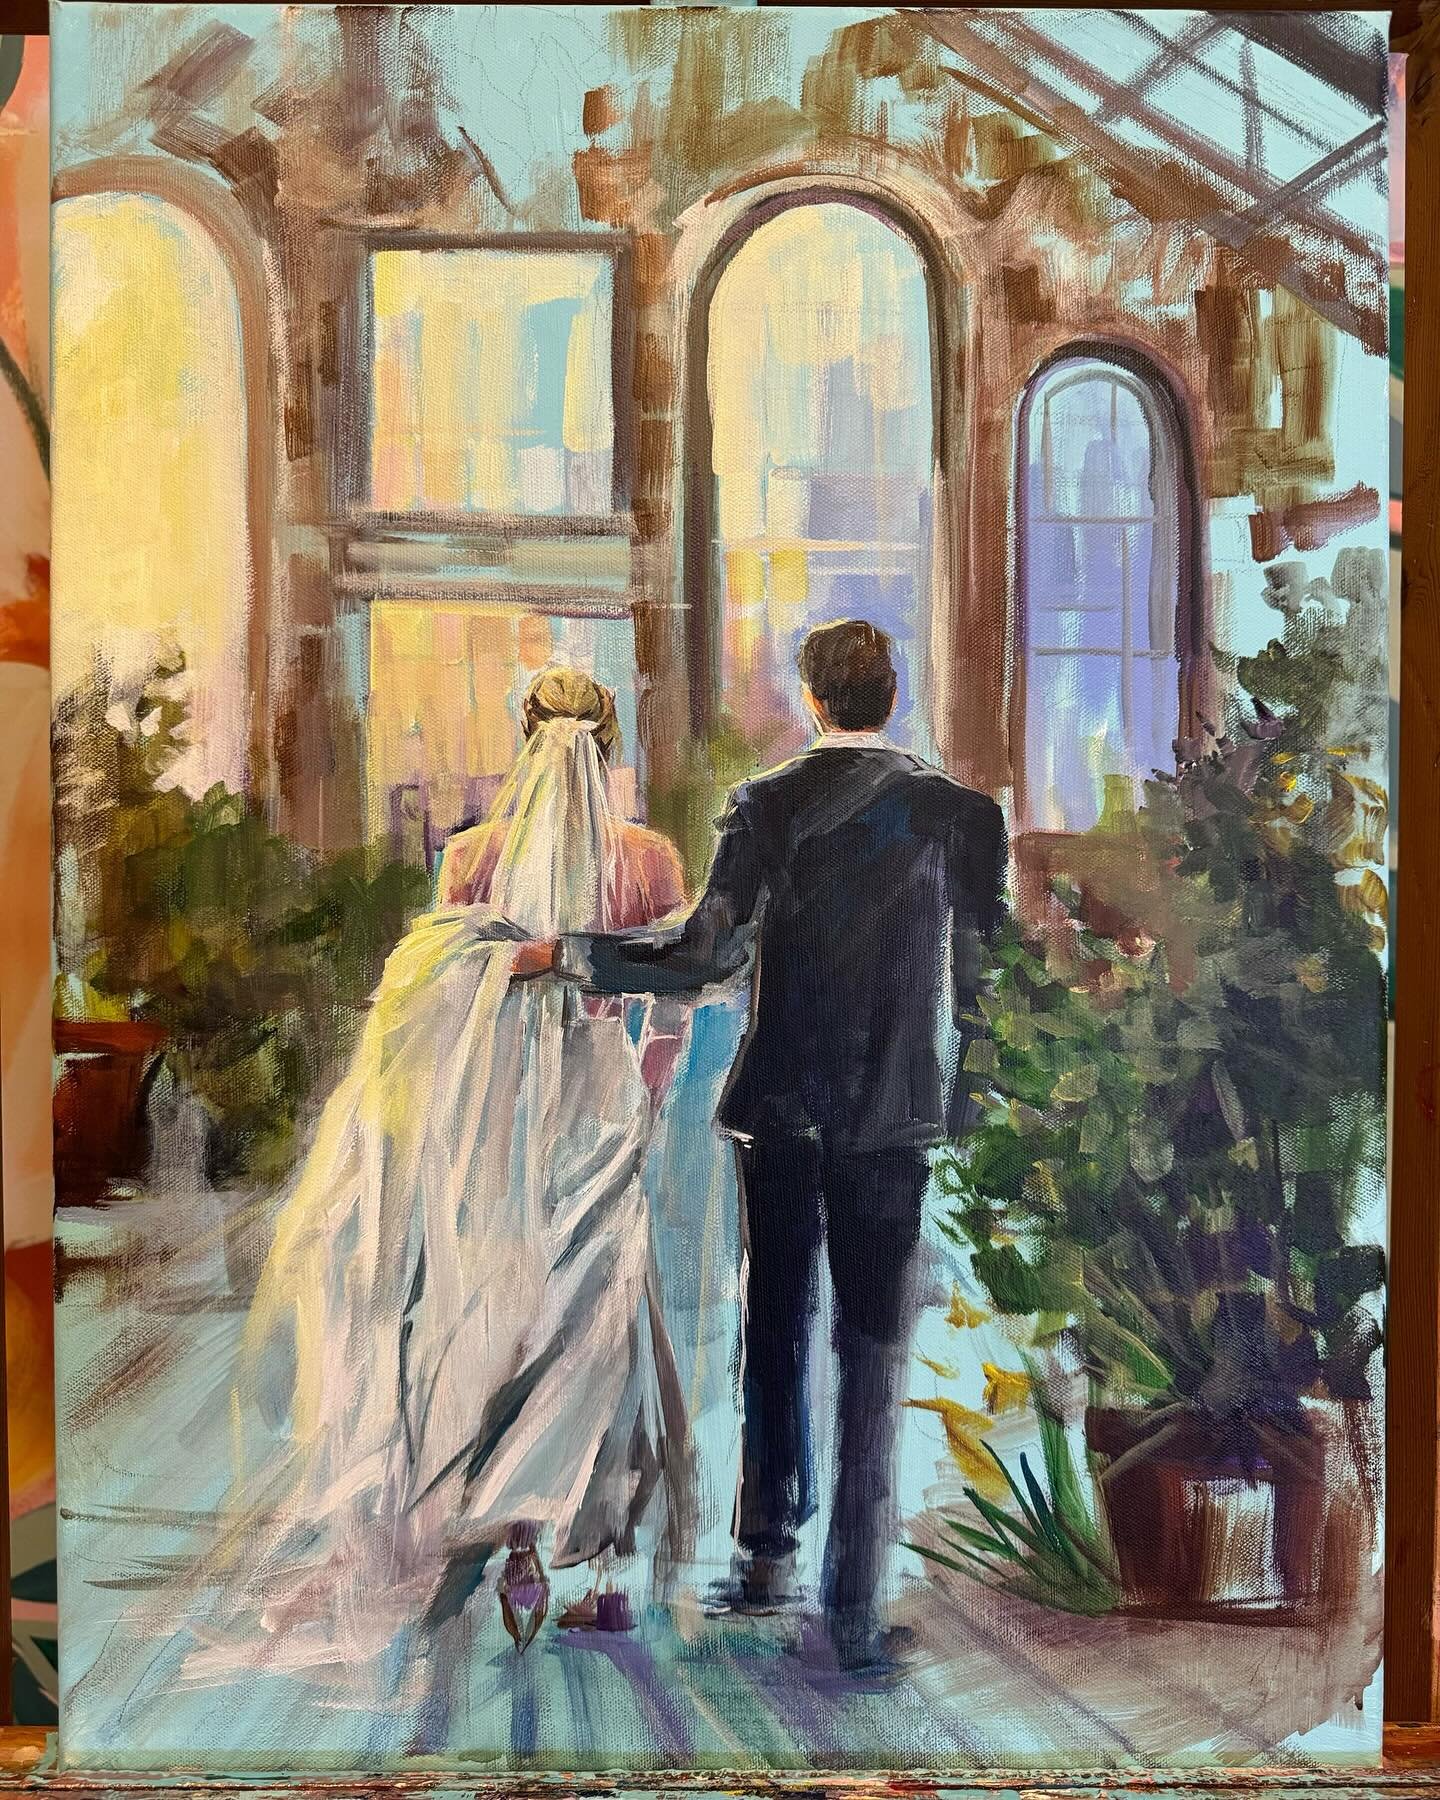 Elysia&rsquo;s spring paintings that we can&rsquo;t get enough of 🎨✨
These are pieces of art that will truly last for generations
.
.
.
.
#liveweddingpainting #uniqueweddingideas #weddinginspo #cloudstudioagency #liveeventpainting #2024brides #2025b